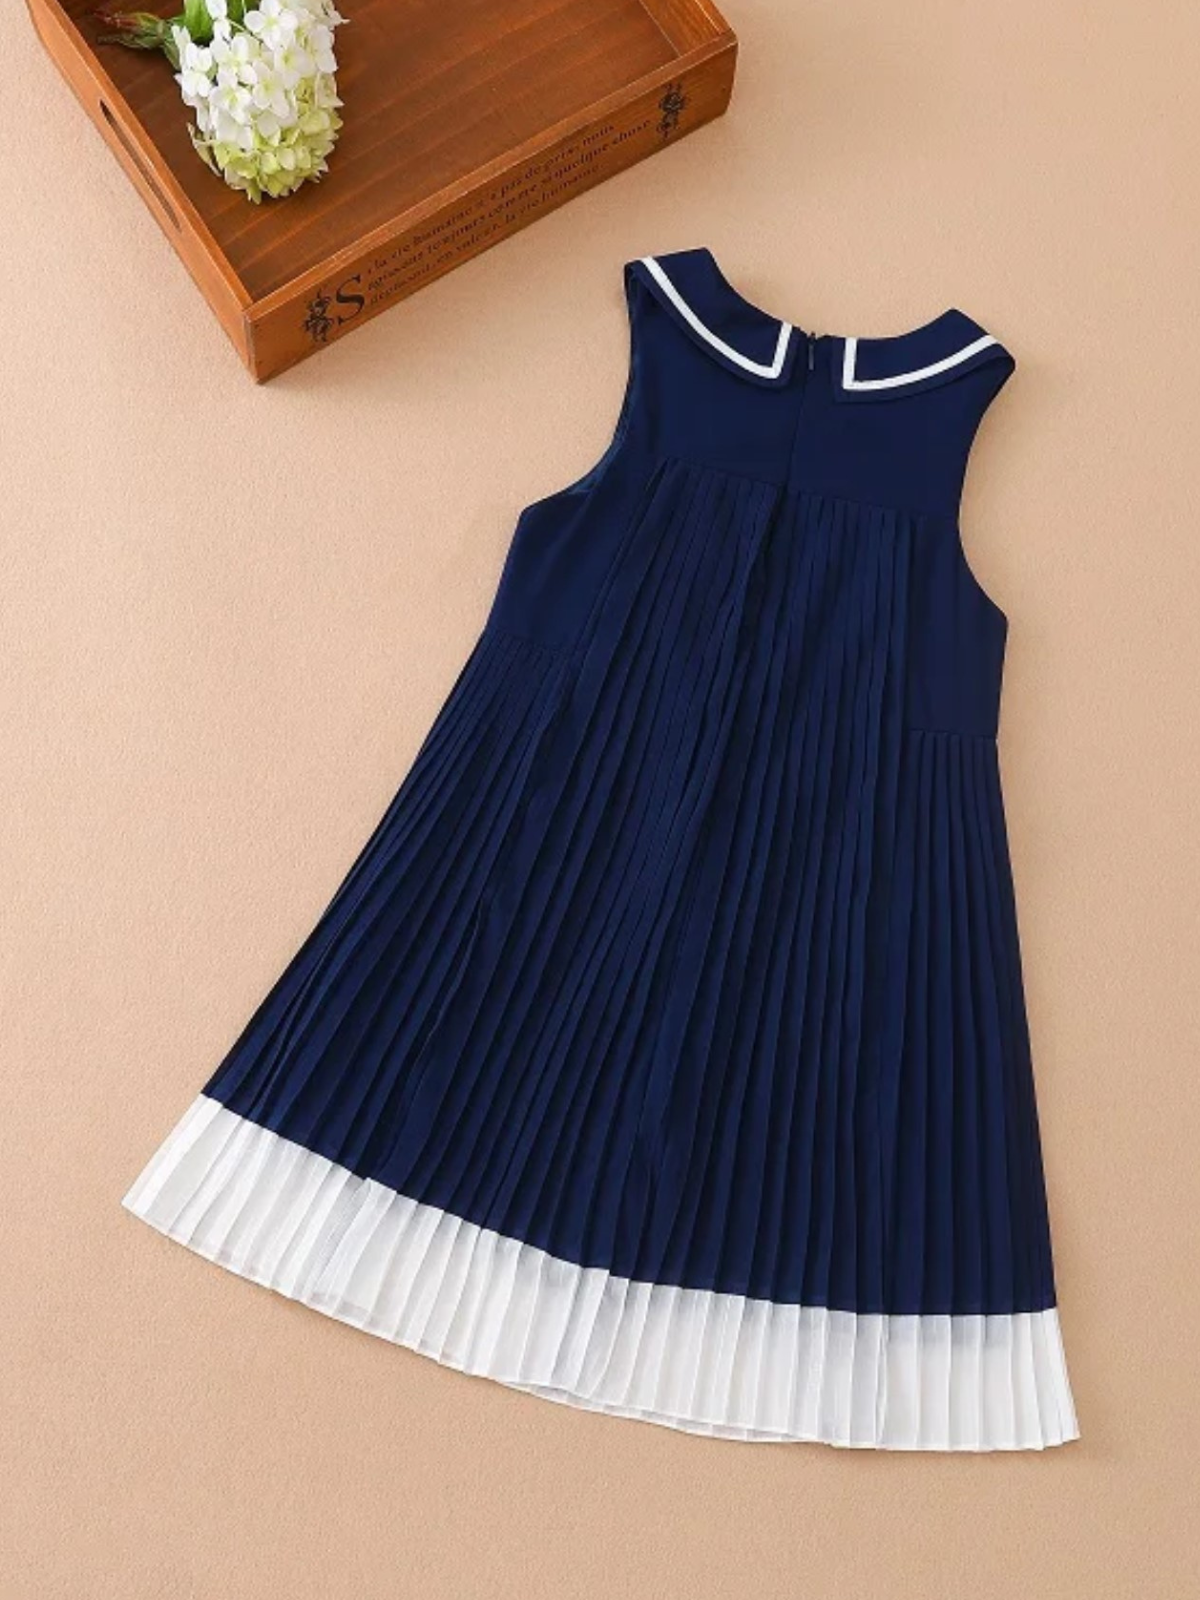 Mia Belle Girls Preppy Pleated Dress | Girls Summer Outfits